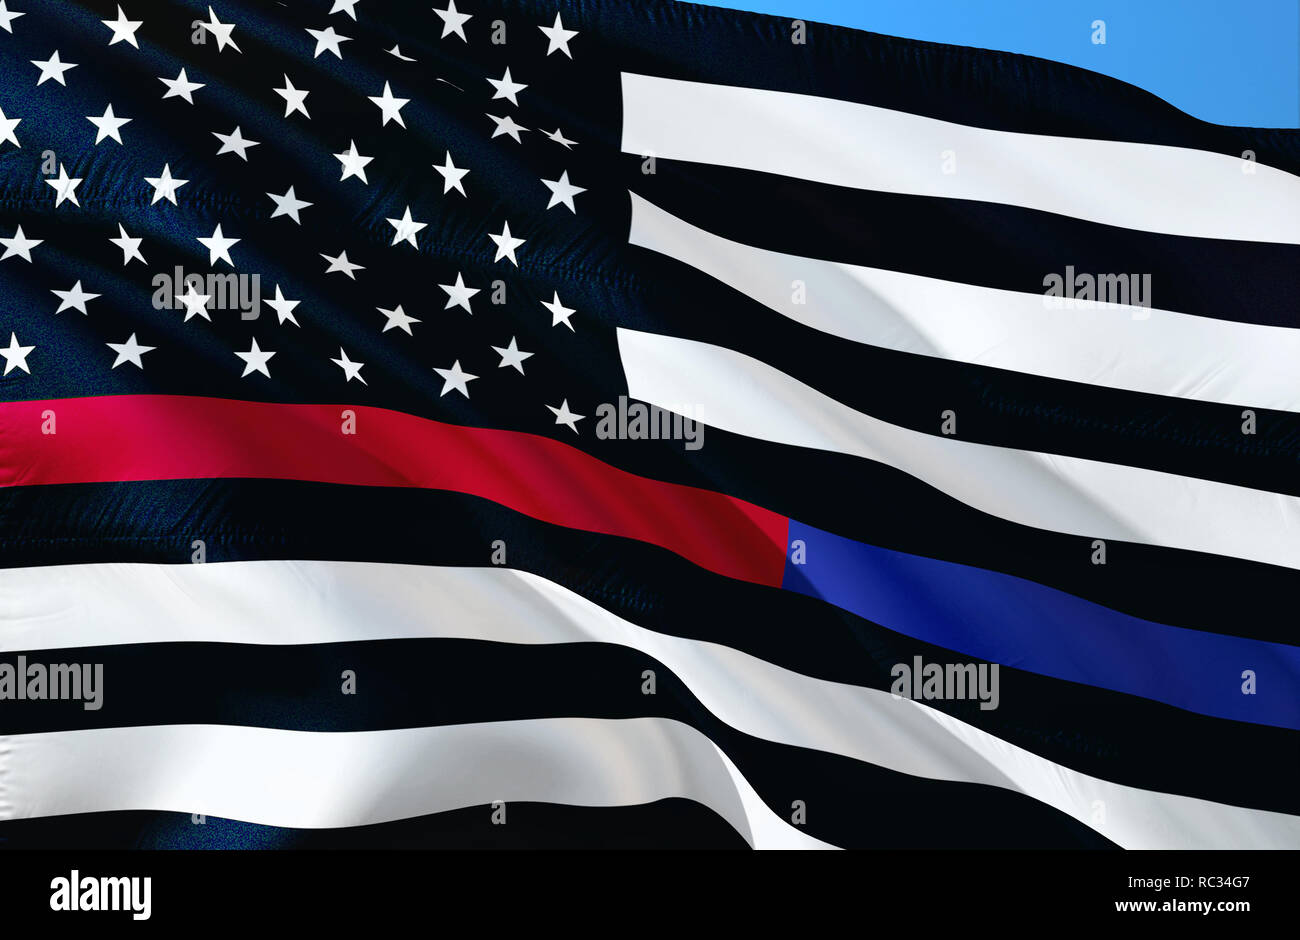 First Responder USA. Thin Blue Line Thin Red Line Embroidered U.S. American Flag Brass Grommets. Emergency medical responder. Flags of Valor. Show you Stock Photo